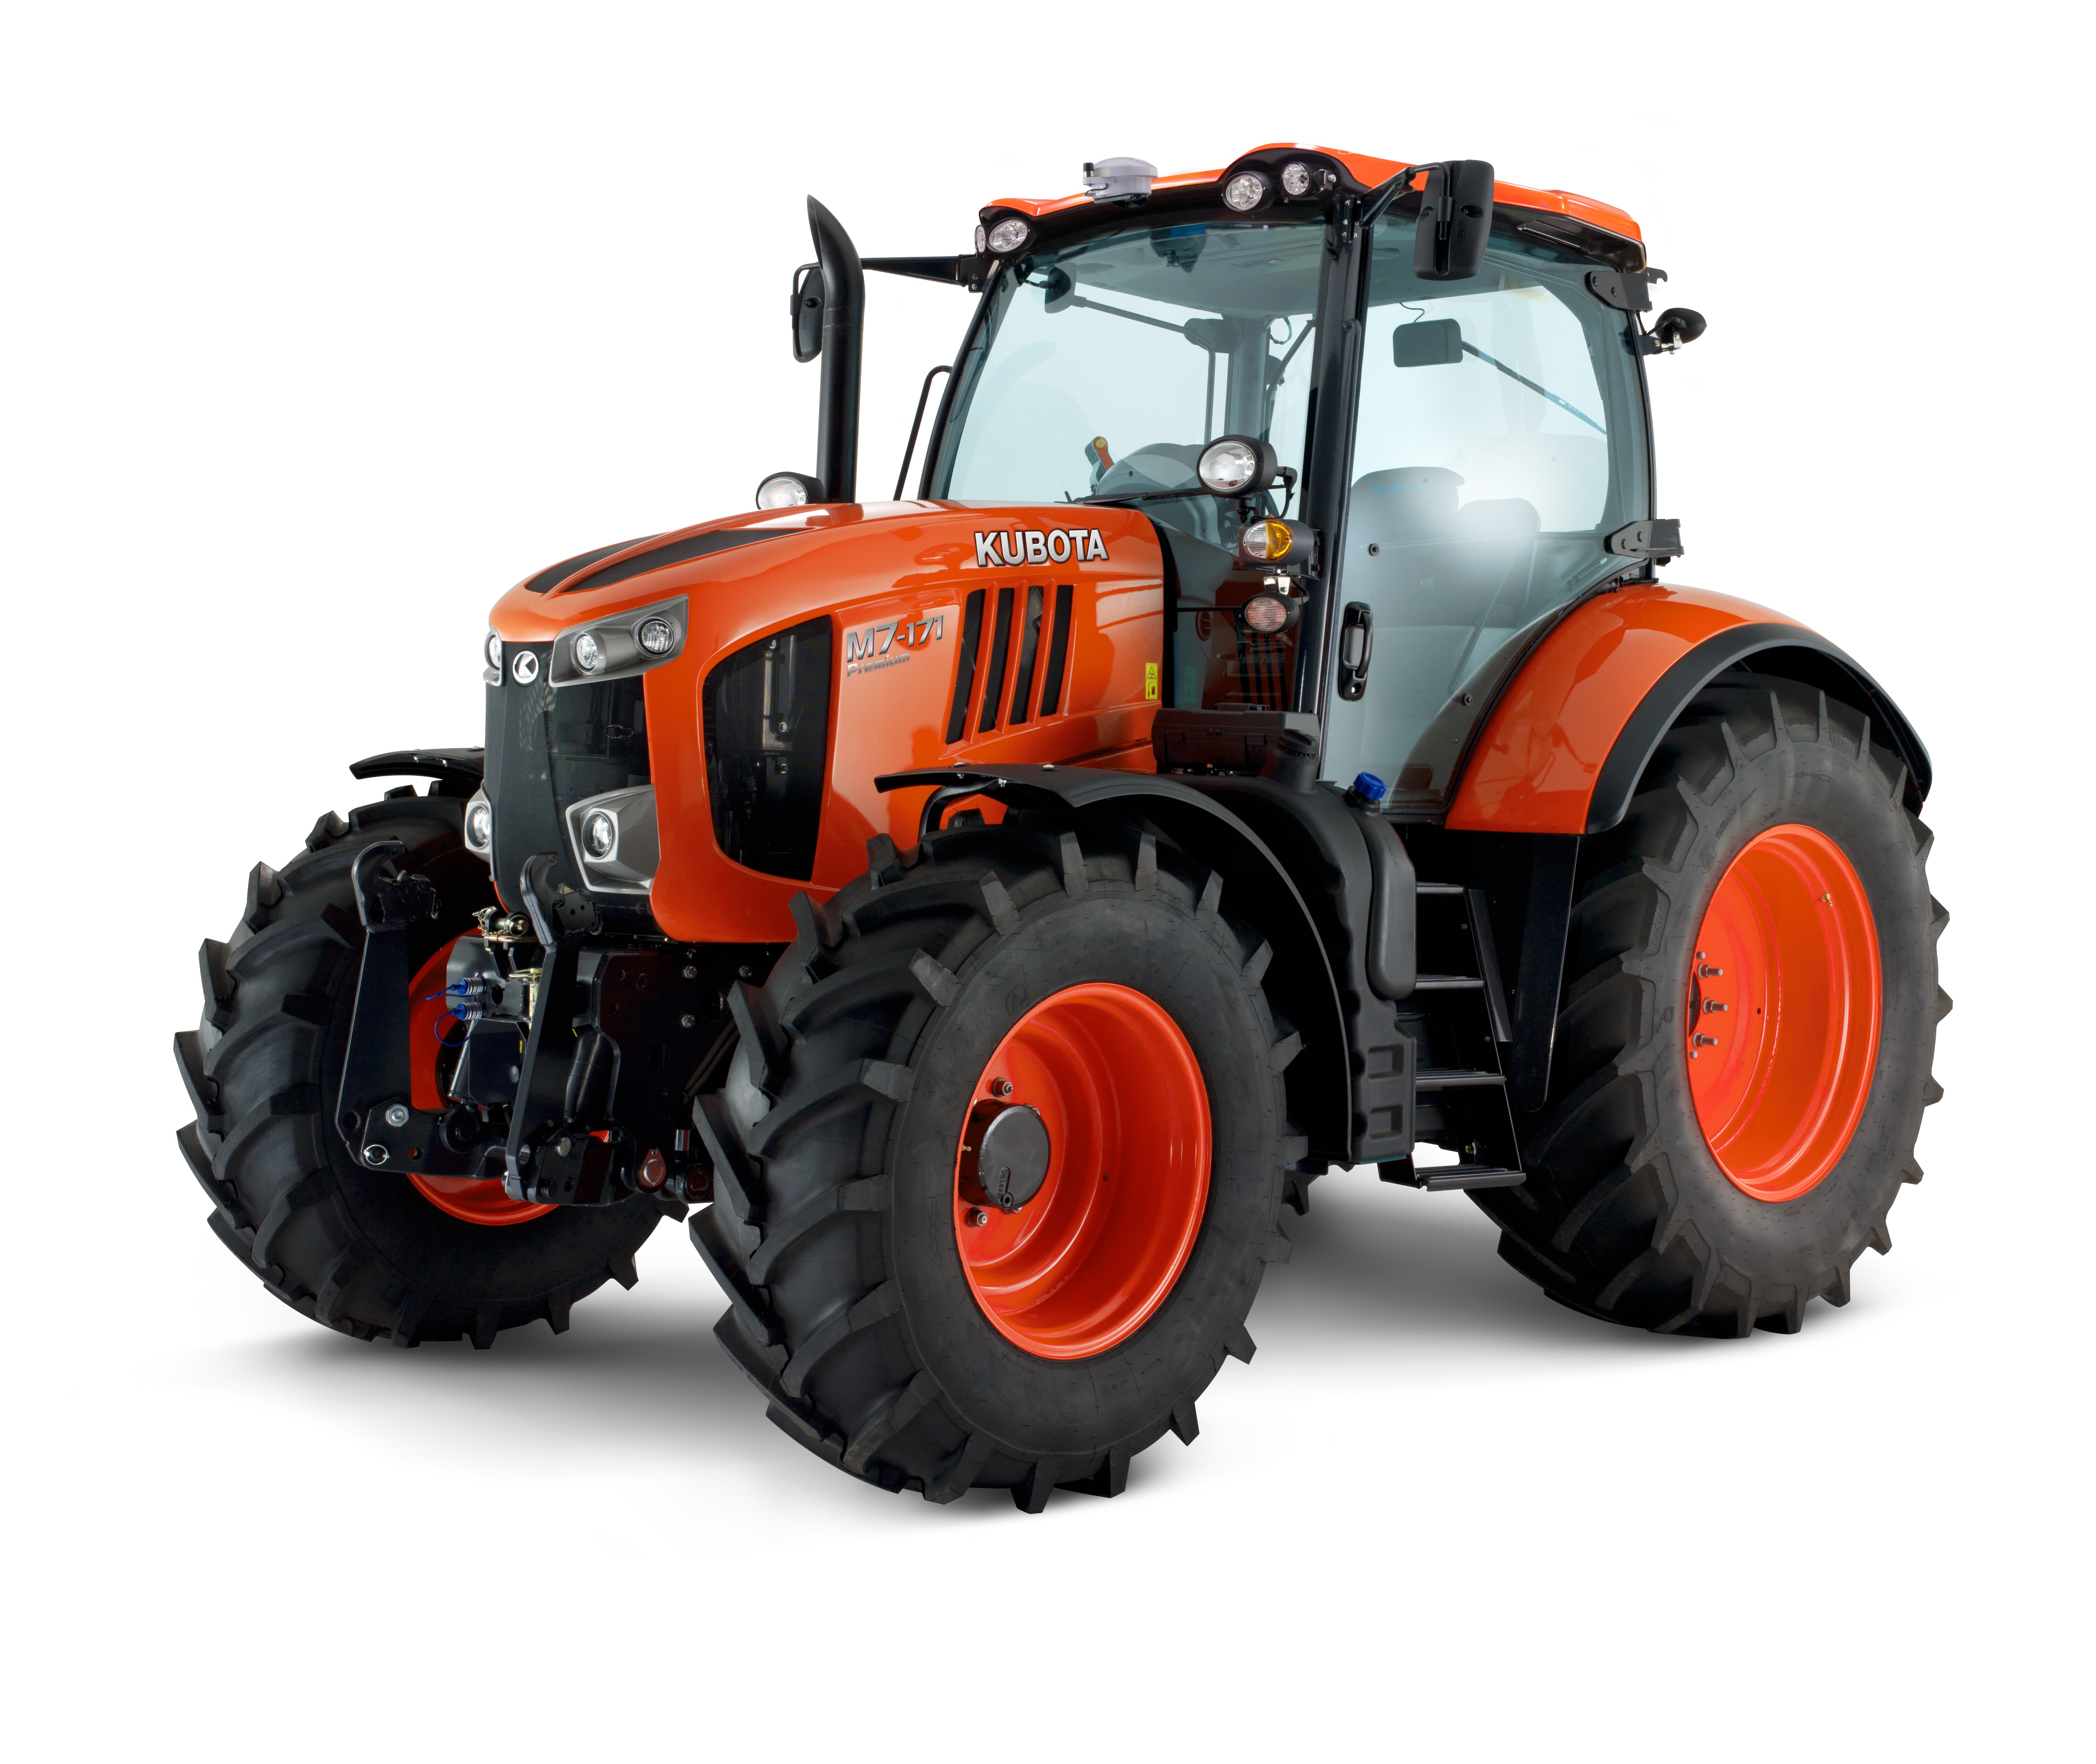 Tractor Backgrounds, Compatible - PC, Mobile, Gadgets| 5450x4586 px